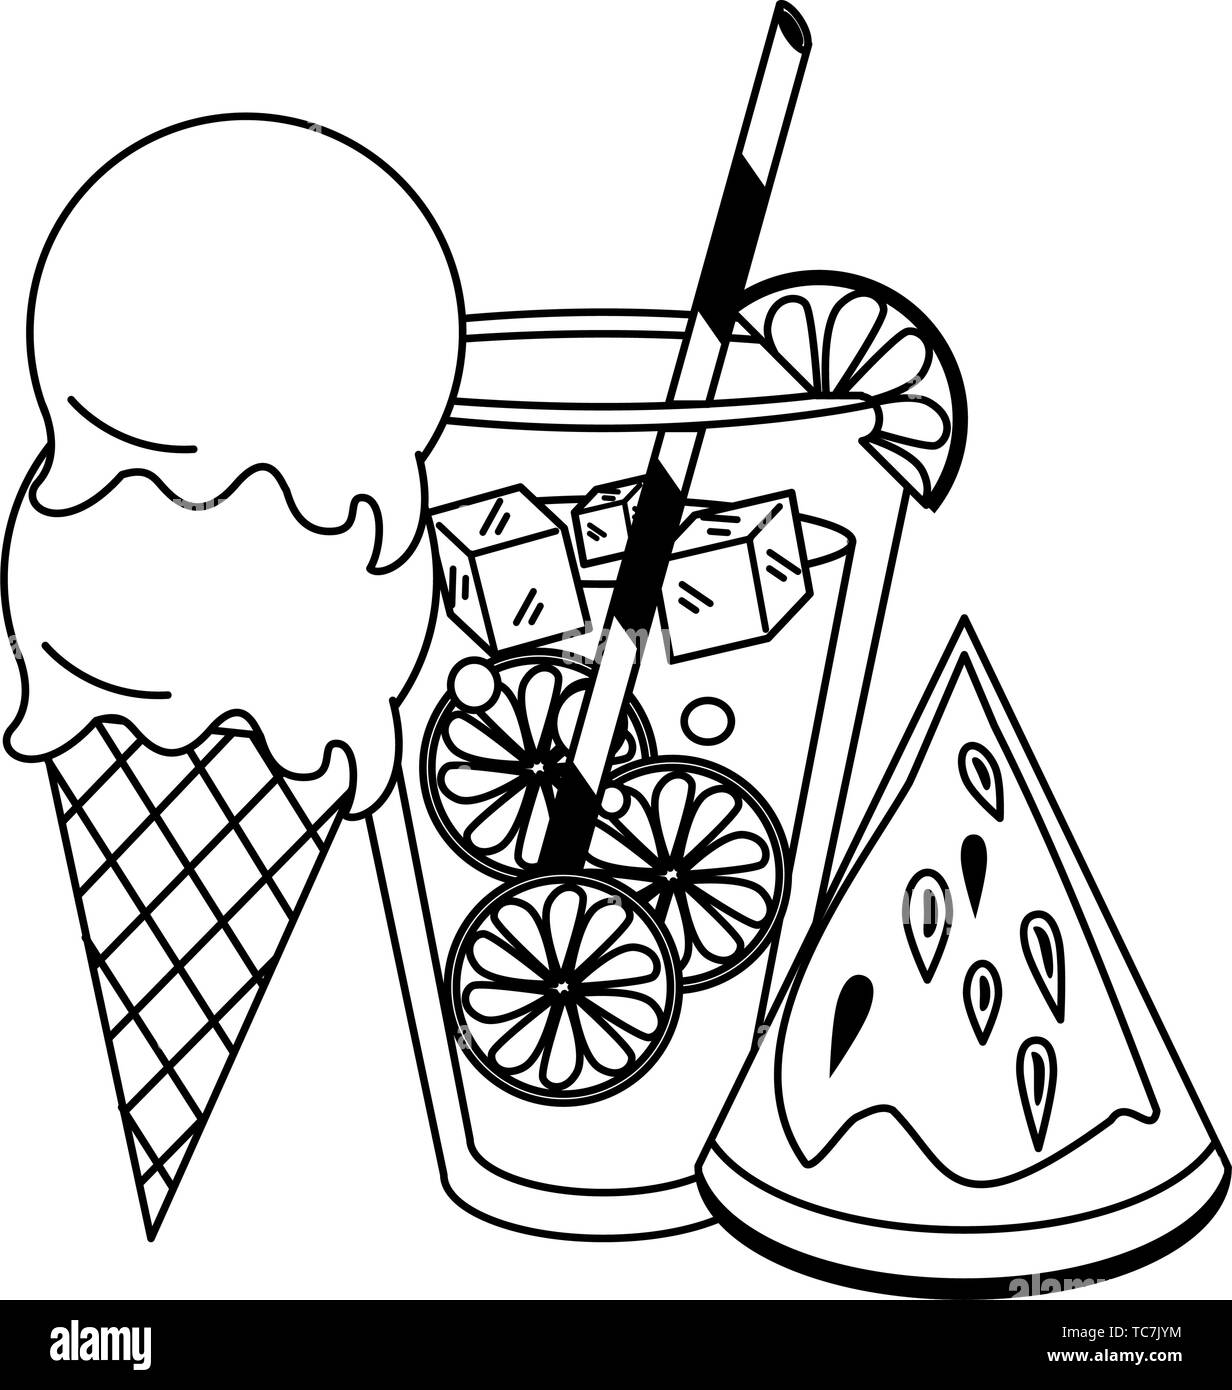 Download 259+ Water Melon Ice Cream Coloring Pages PNG PDF File